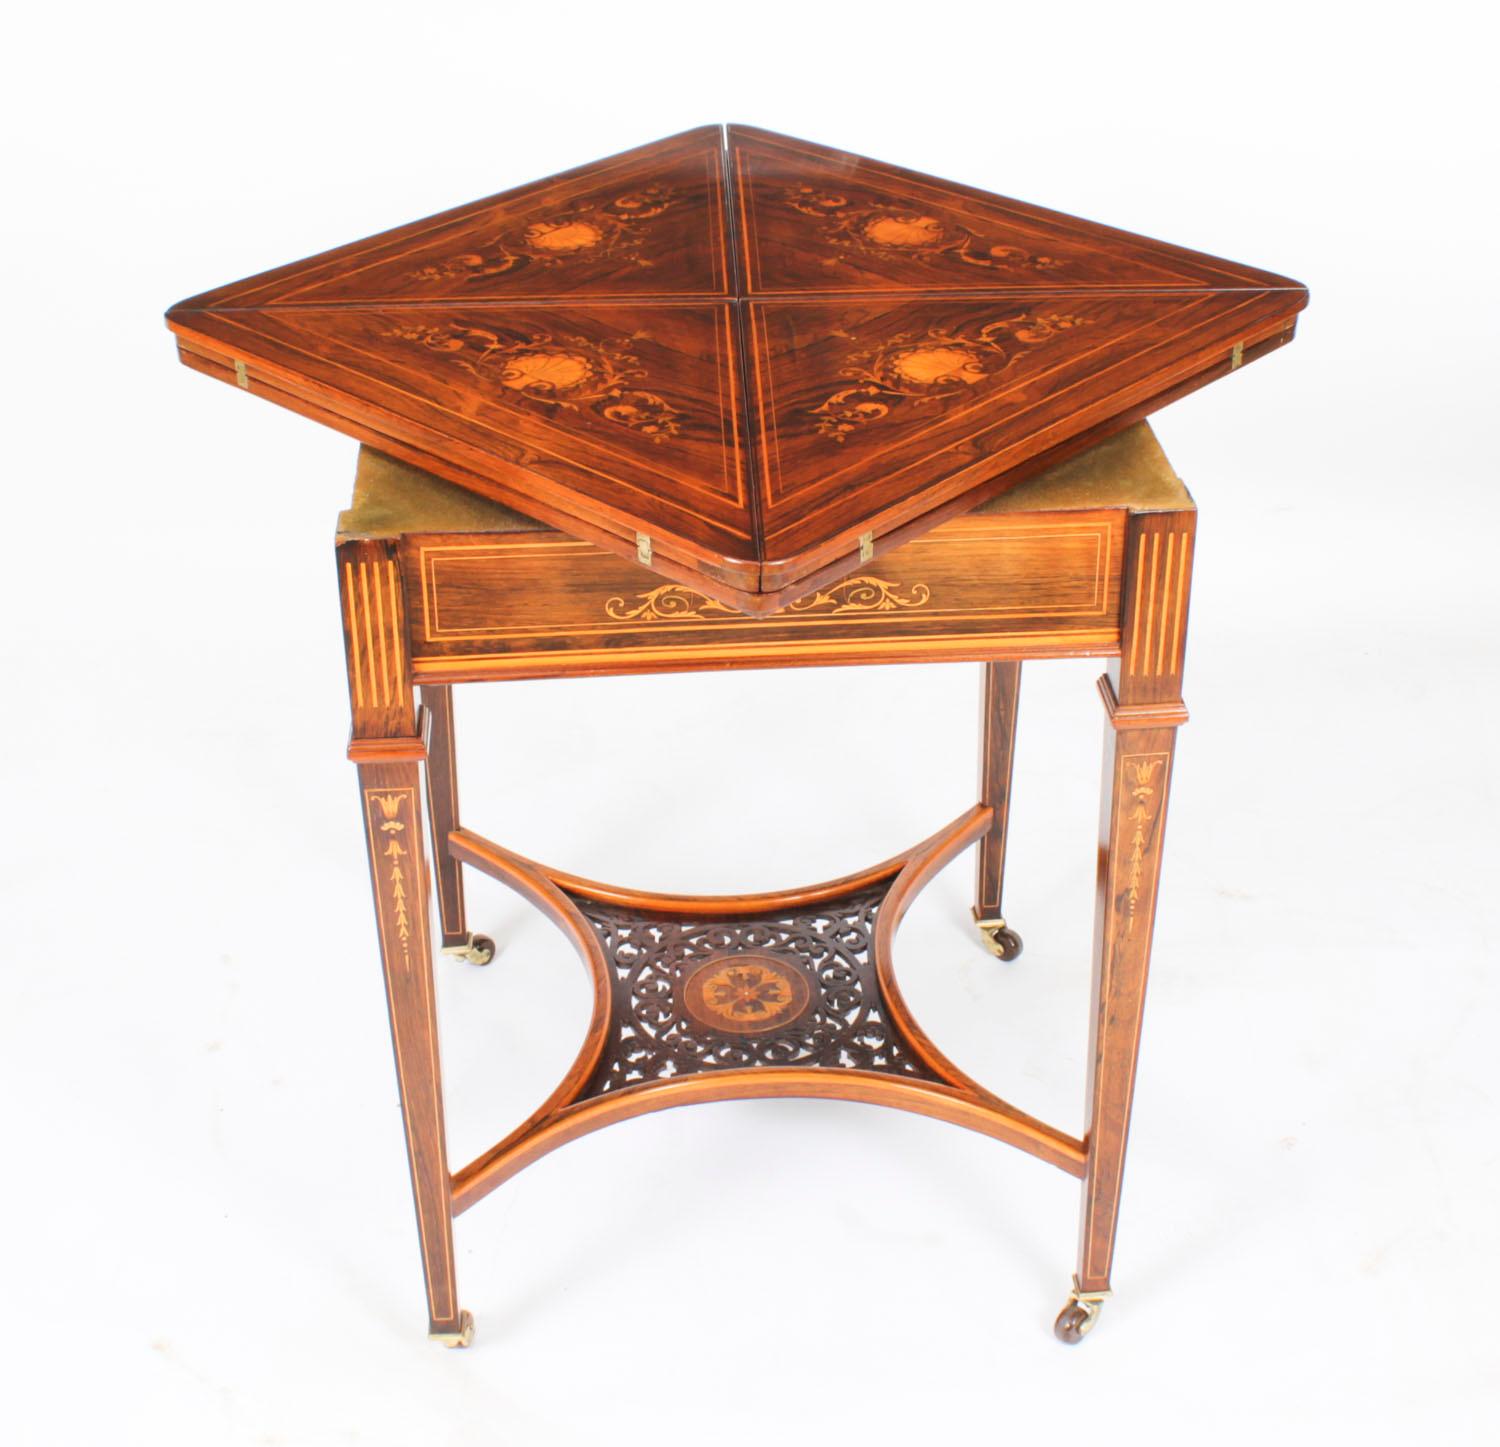 This is a beautiful antique Victorian envelope card table, circa 1880 in date.
 
The card table is made from superb quality Gonçalo Alves and has striking floral and foliate marquetry decoration.
 
The swivelling top opens like an envelope,